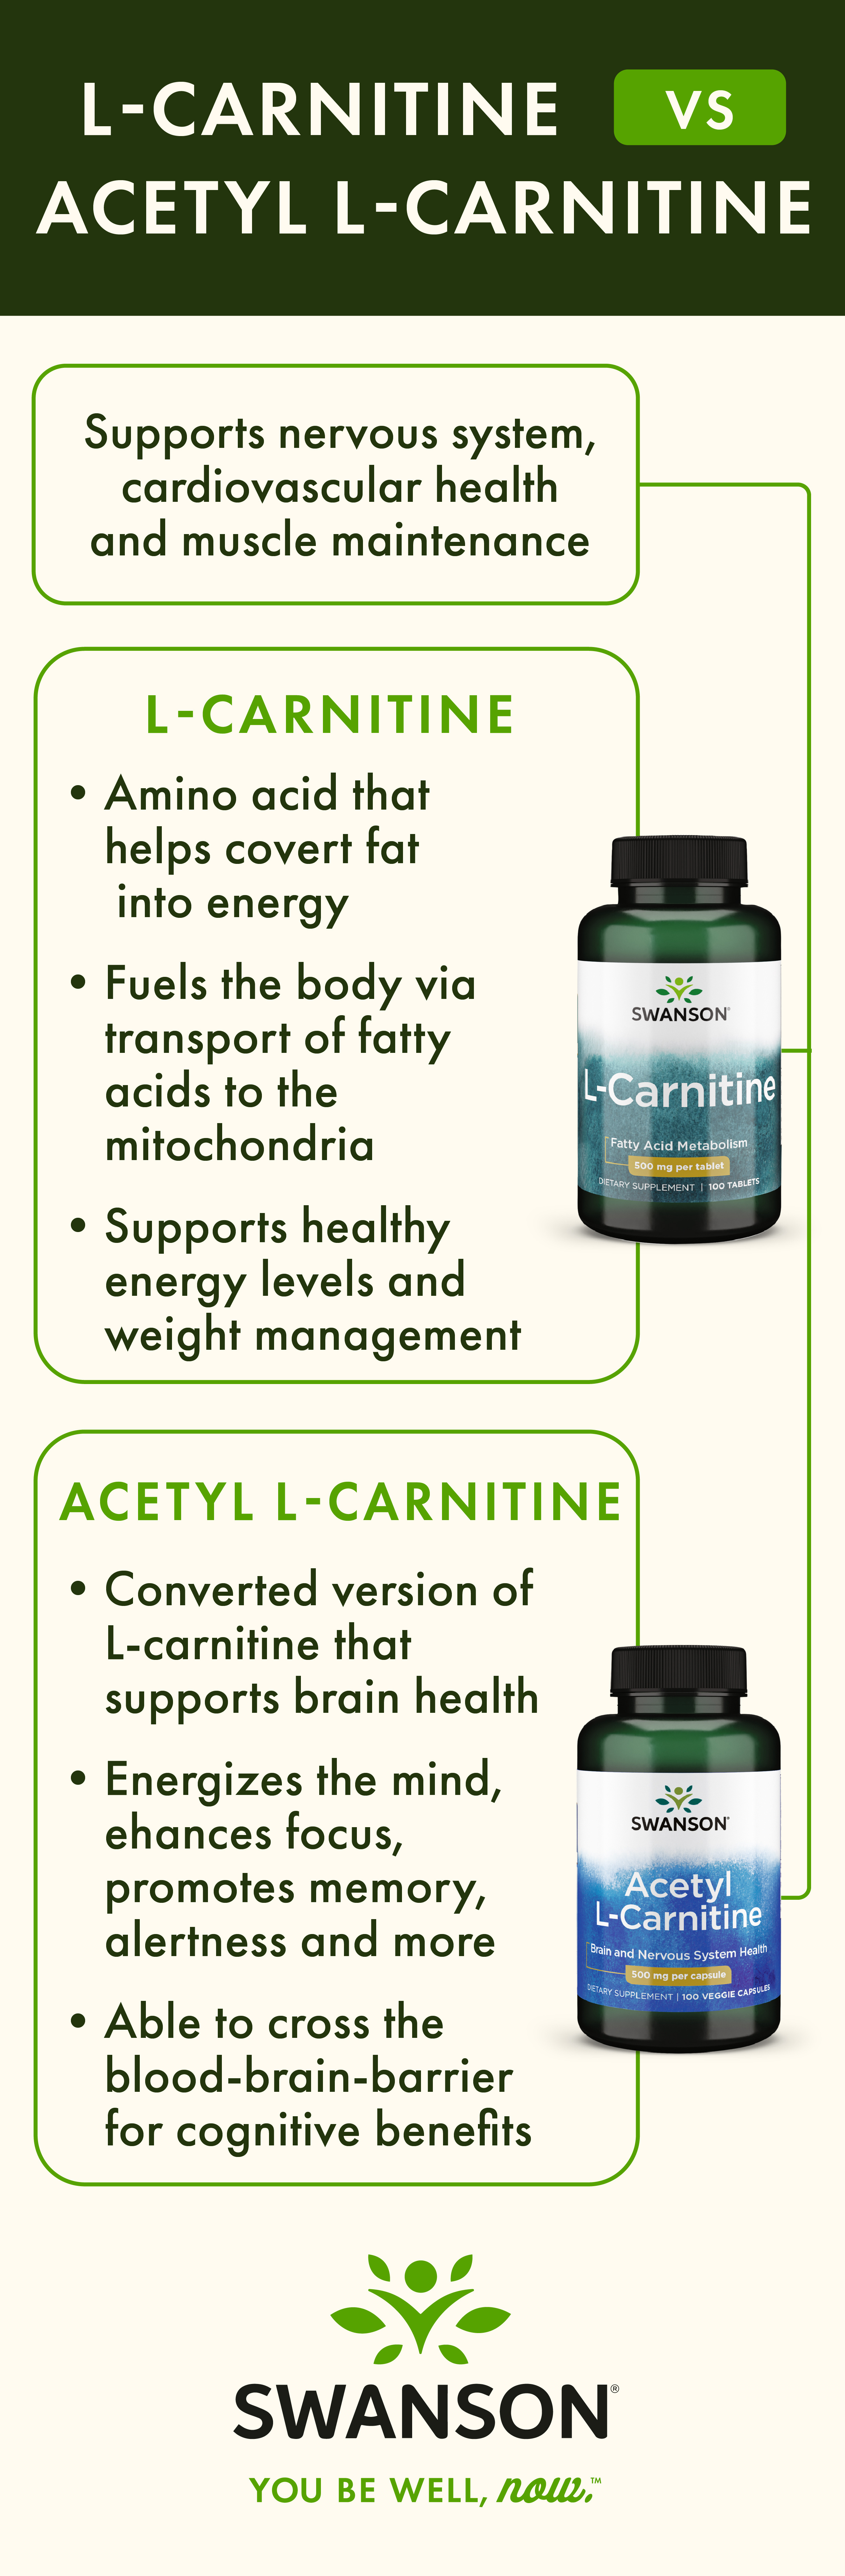 L-Carnitine Vs Acetyl L-Carnitine Infographic by Swanson Health